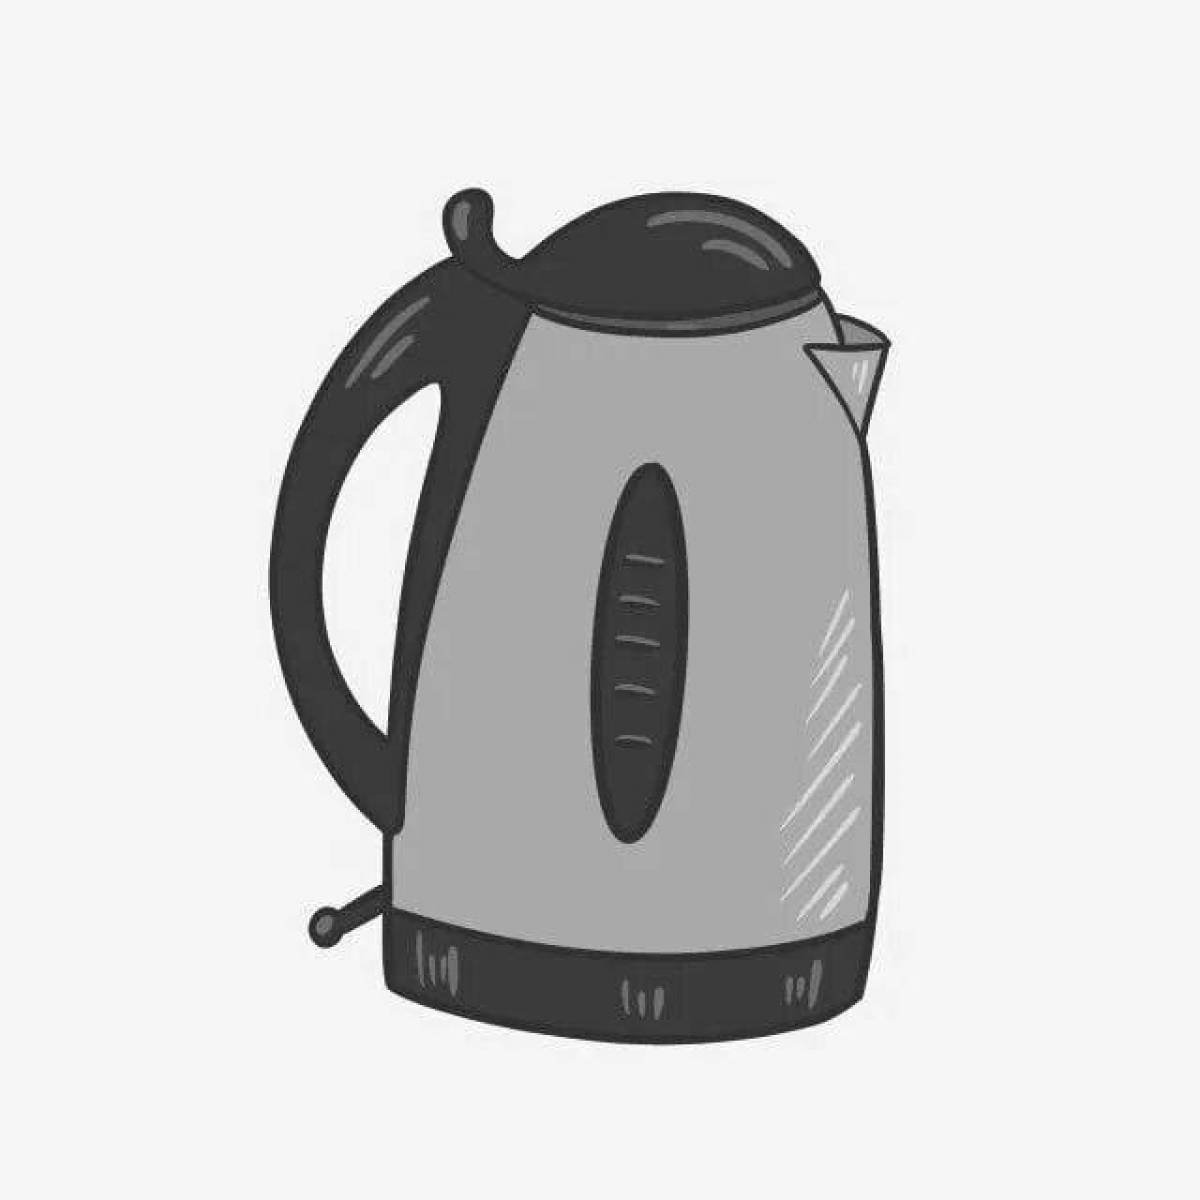 Electric kettle #12